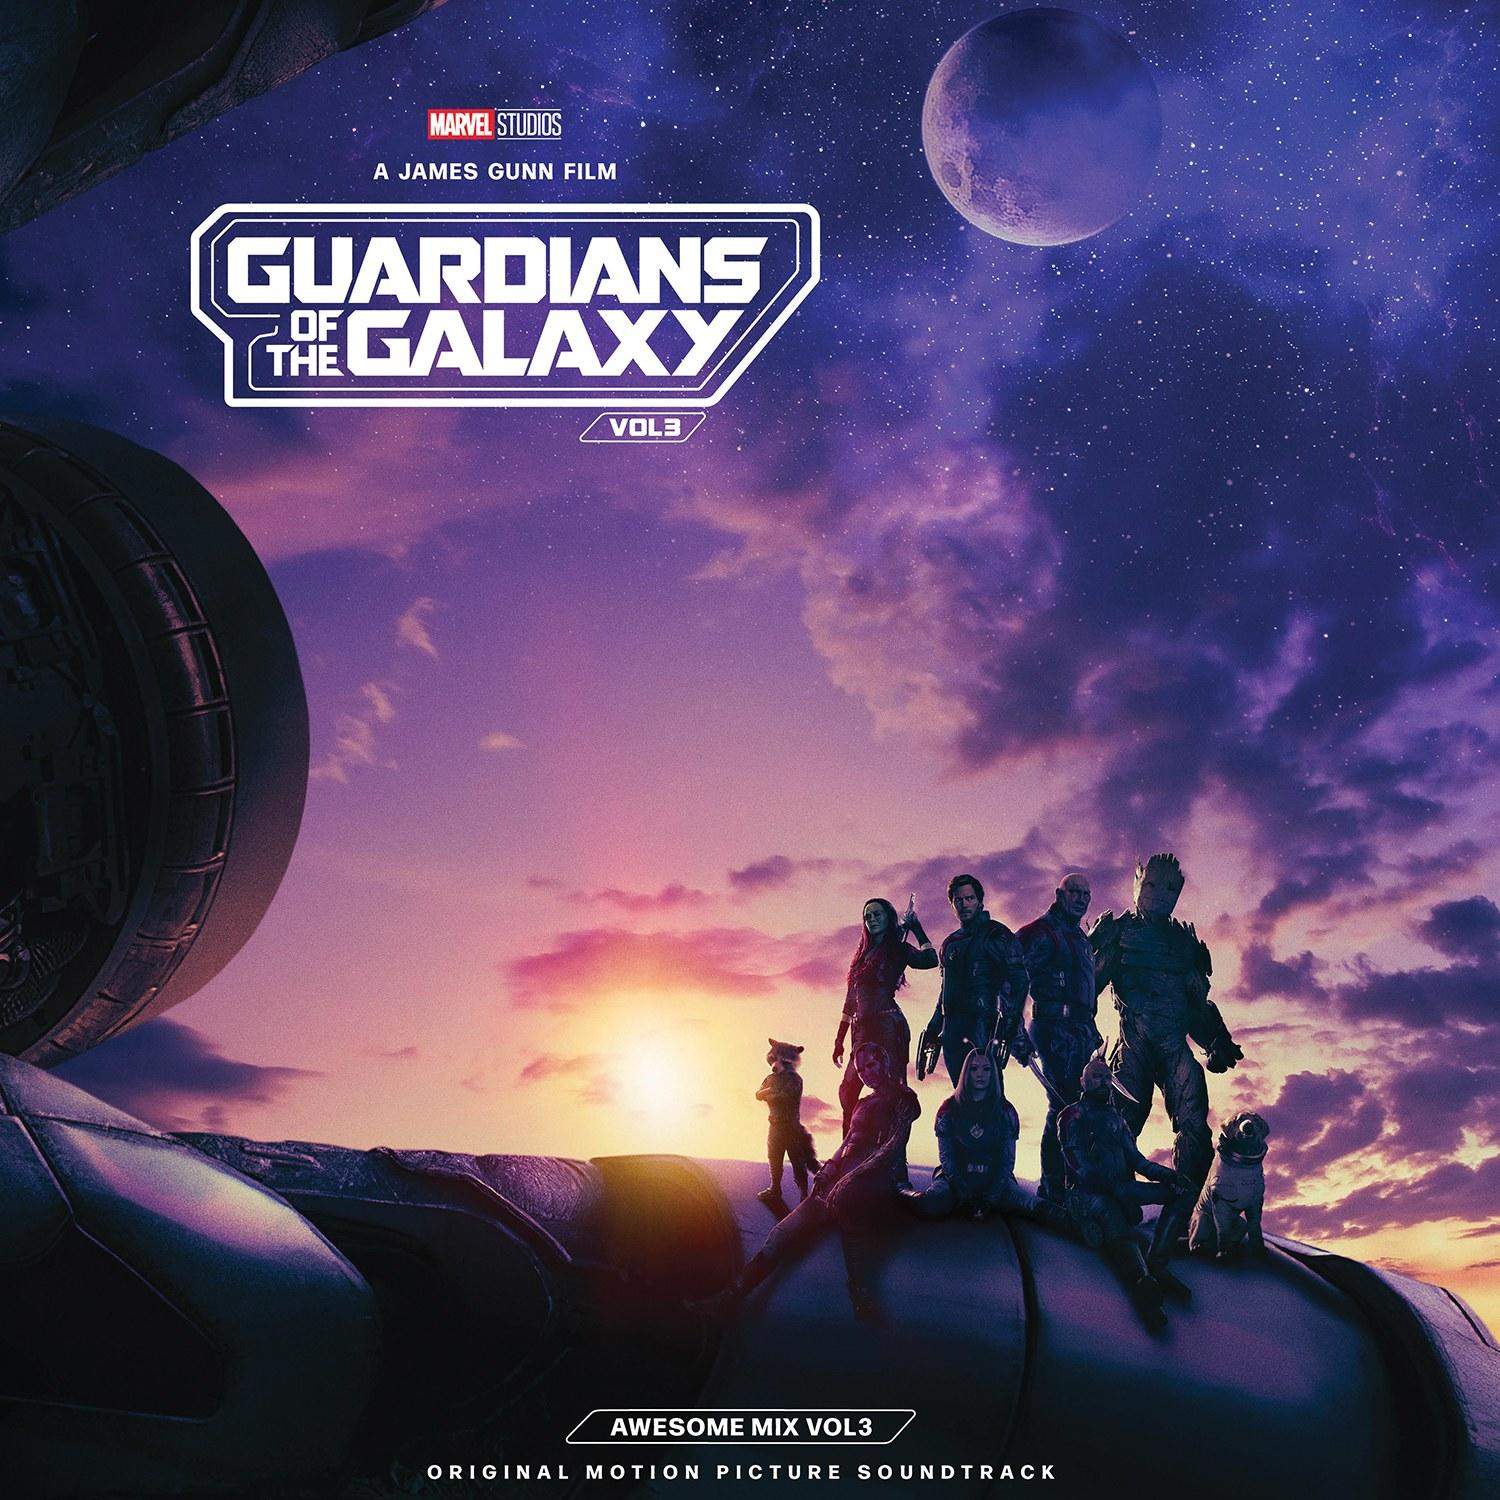 Exklusive Awesome (Vinyl) The Poster Blue Vol. Various Vol. Of - Edition + - Mix 3 Guardians (2LP) 3: Galaxy